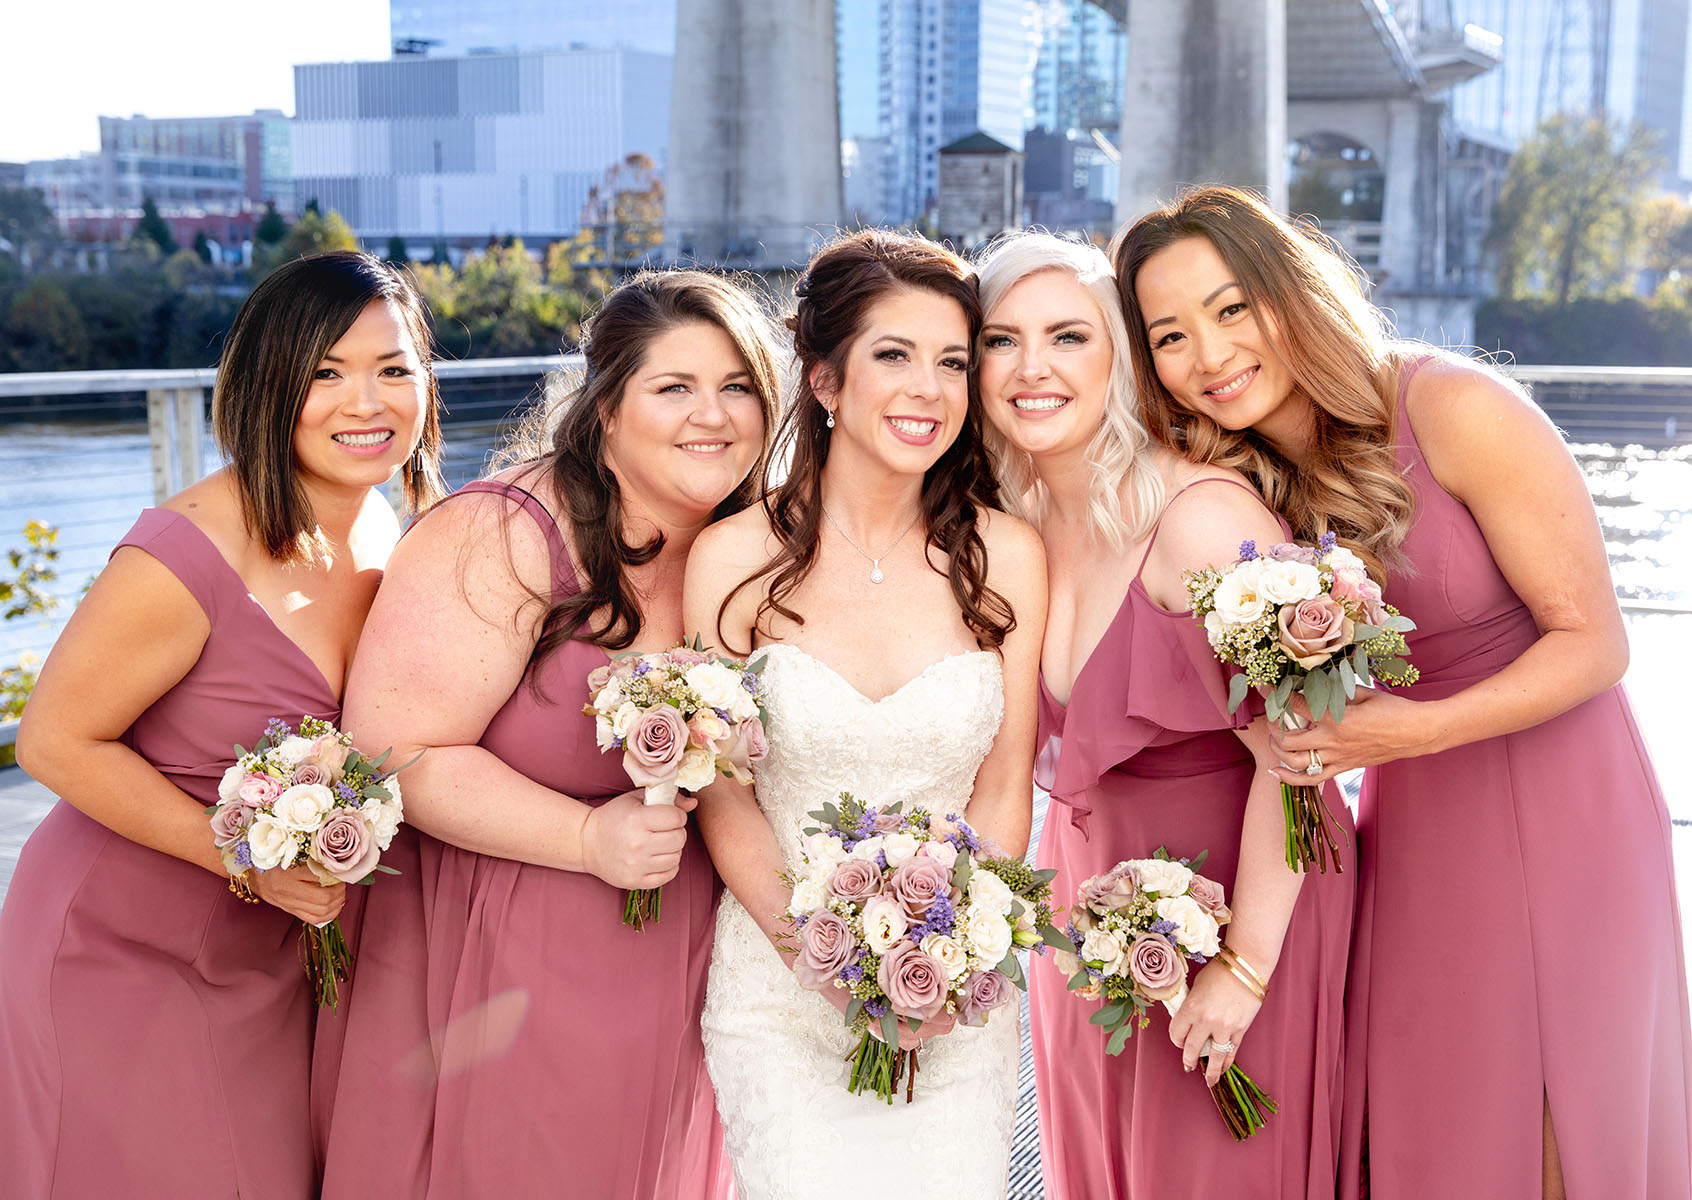 Kelly with Bridesmaids